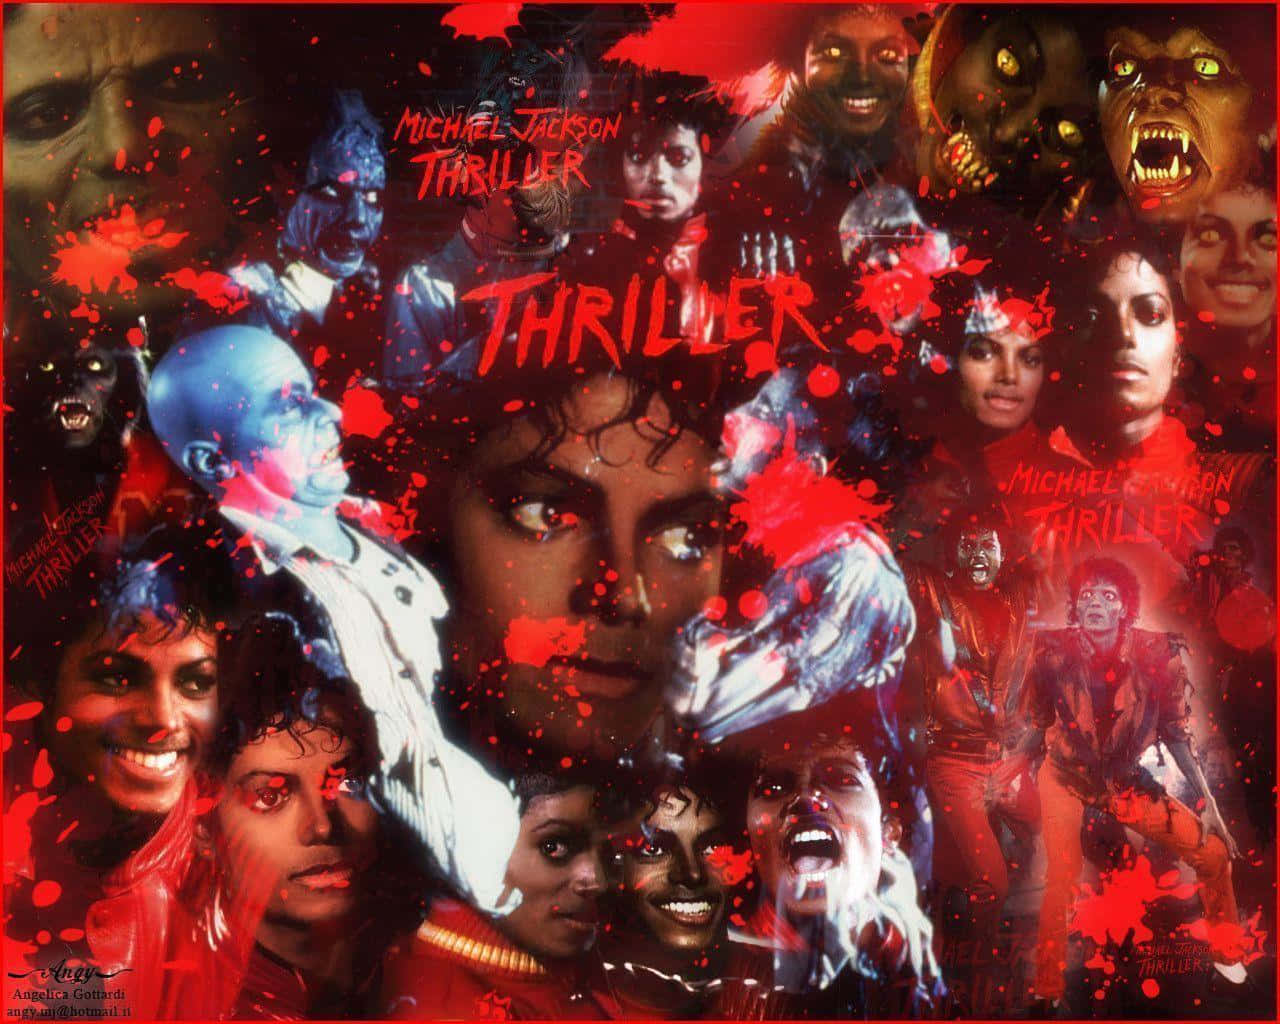 The legendary Michael Jackson in his iconic "Thriller" music video Wallpaper